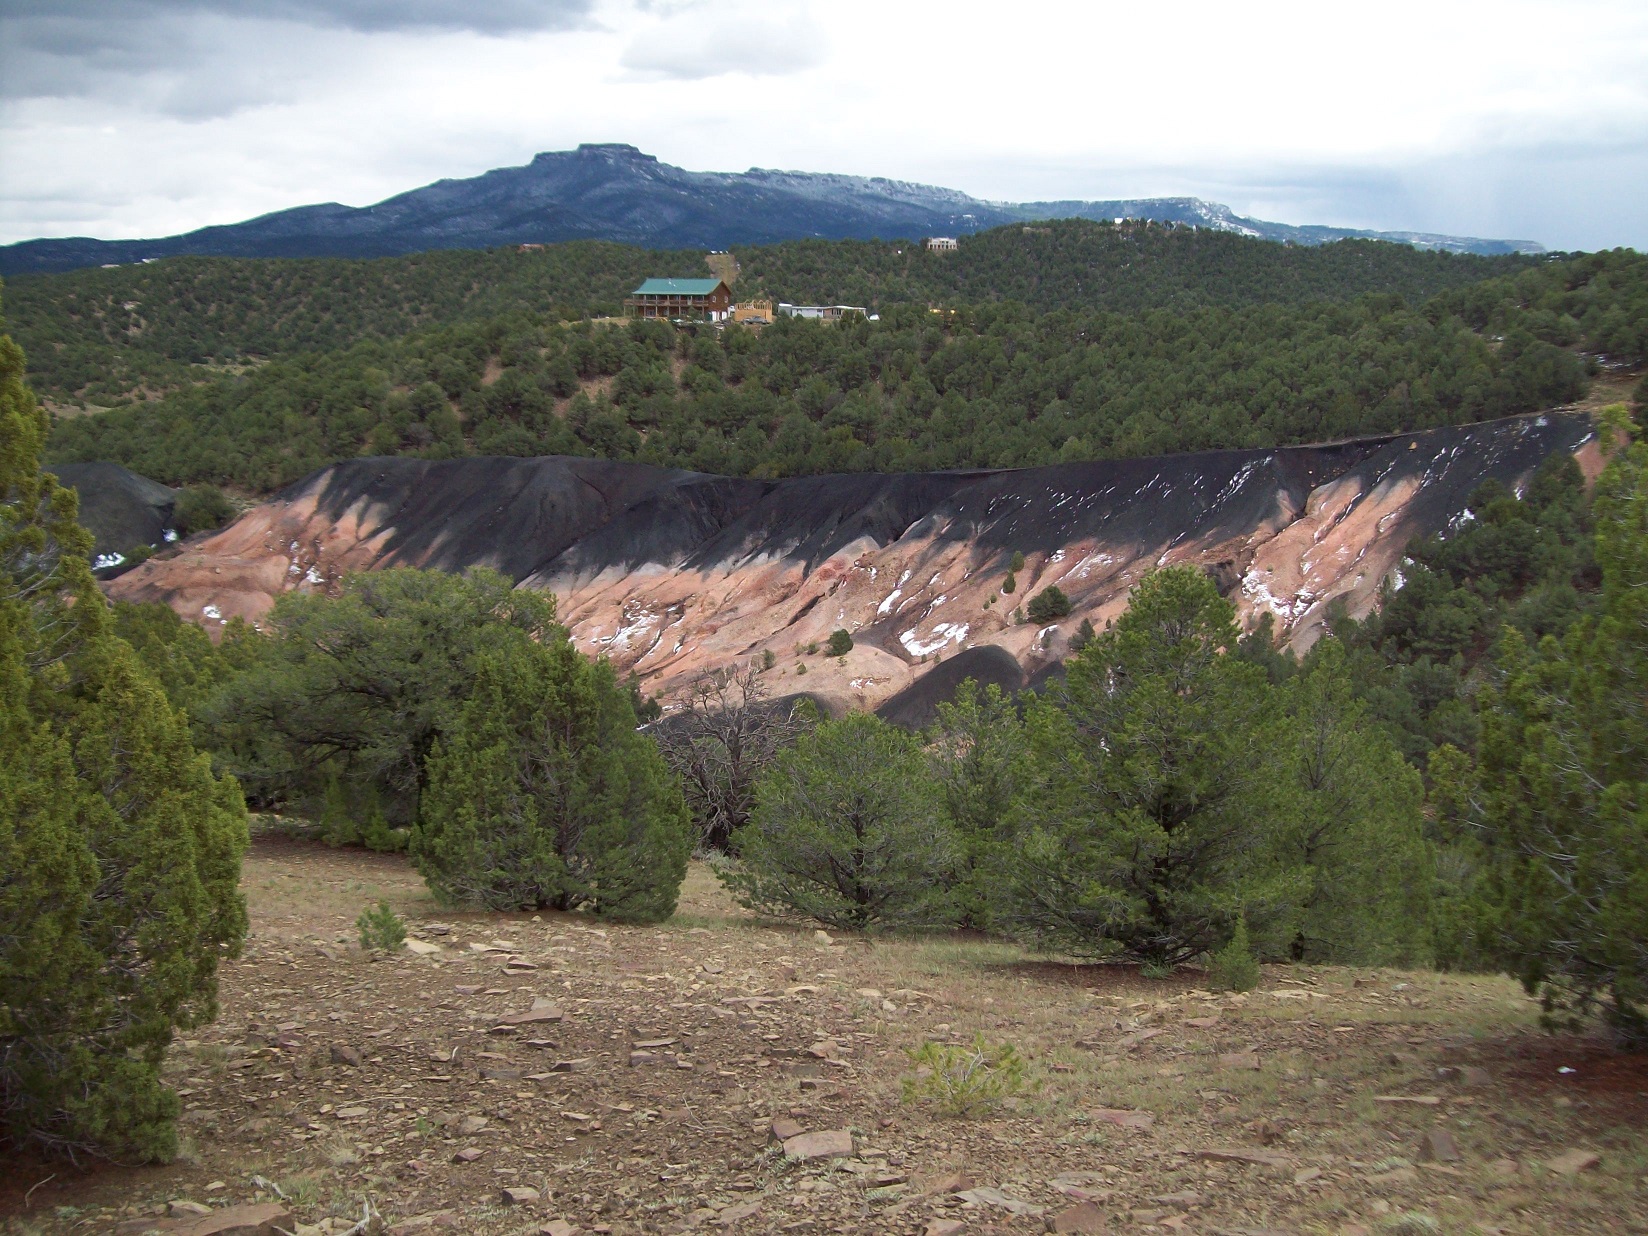 Trees and a coal seam are seen across the hilly landscape of the West Sorpis coal refuse reclamation project, Las Animas County, Colorado